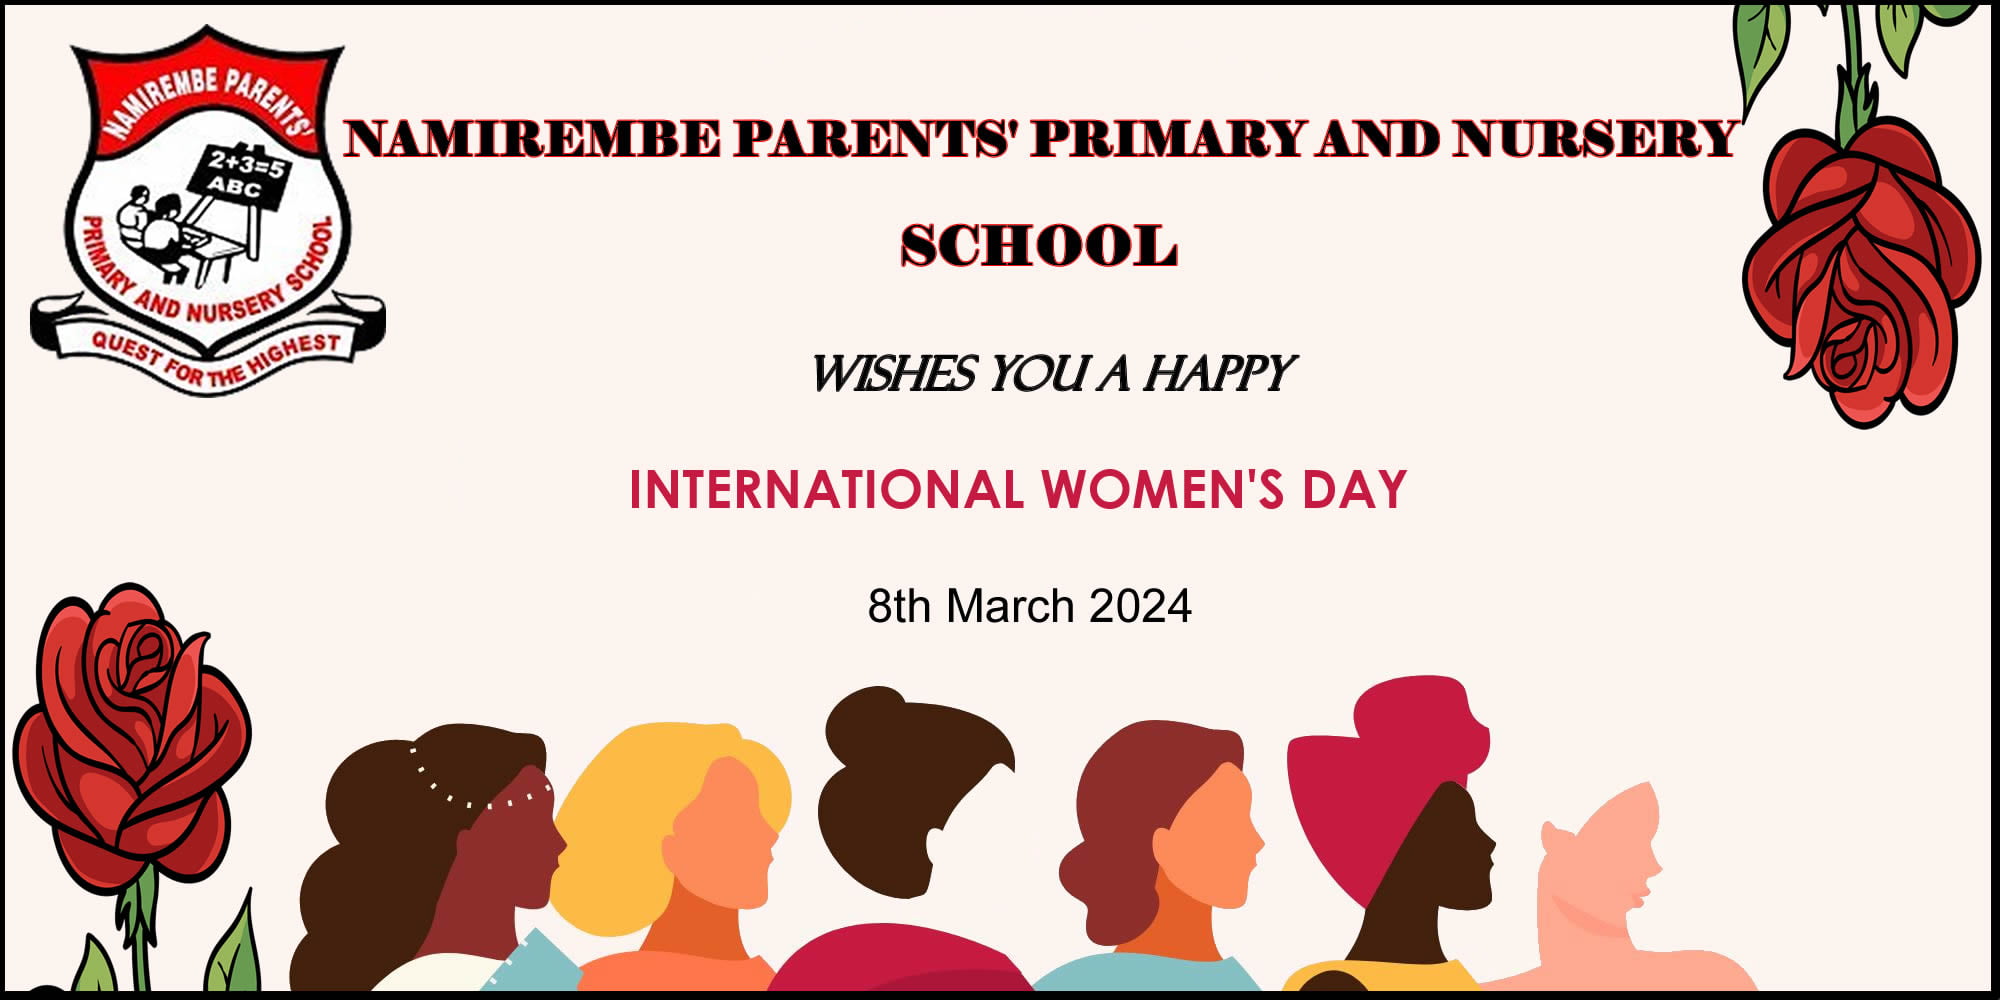 Namirembe Parents' School wishes you happy women's day